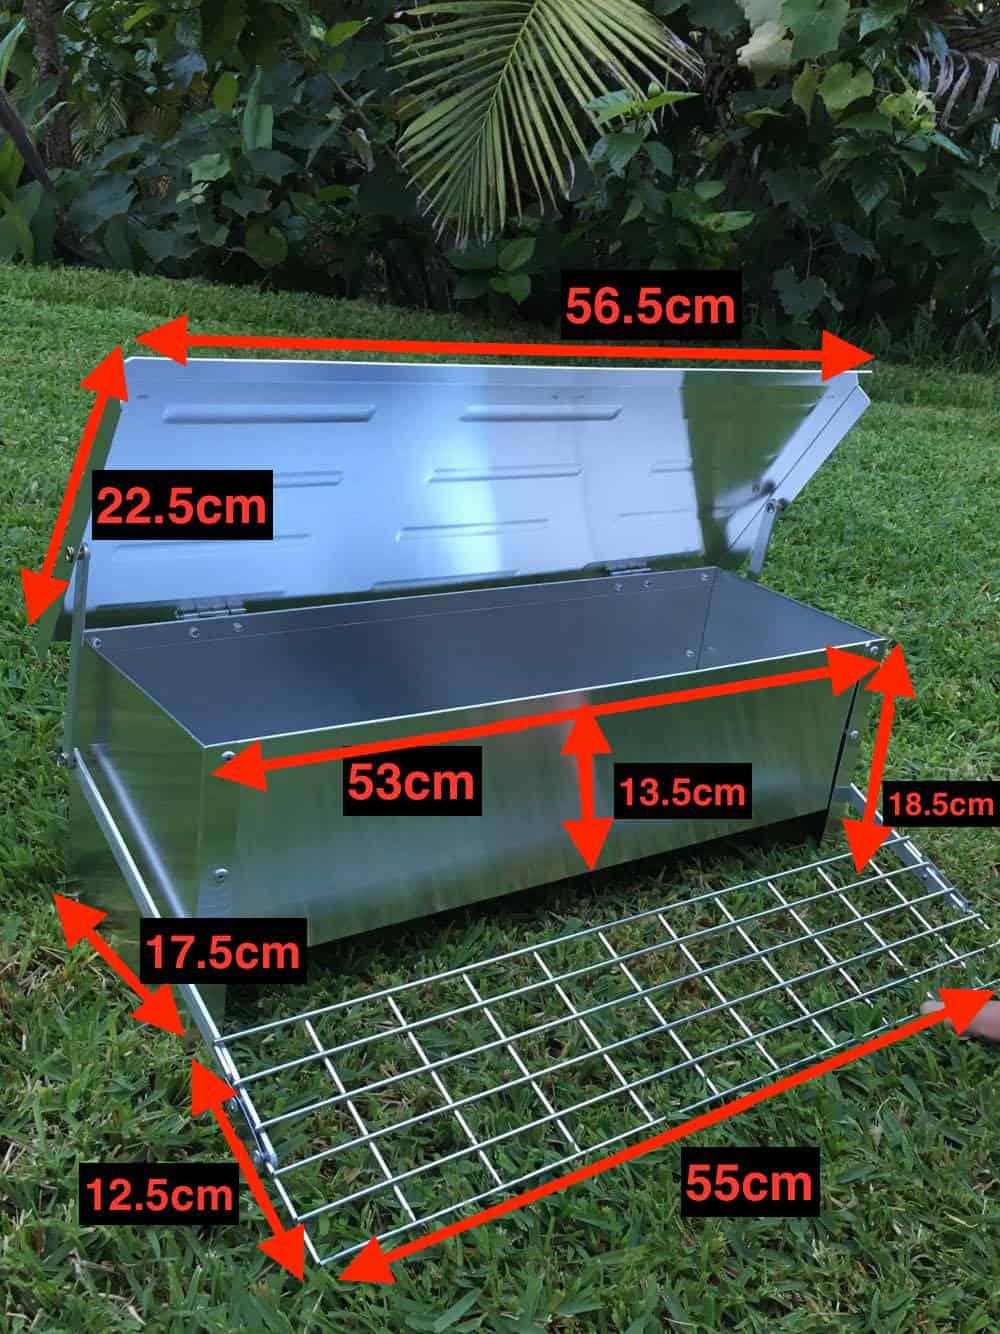 Automatic Chicken Feeder Dimensions